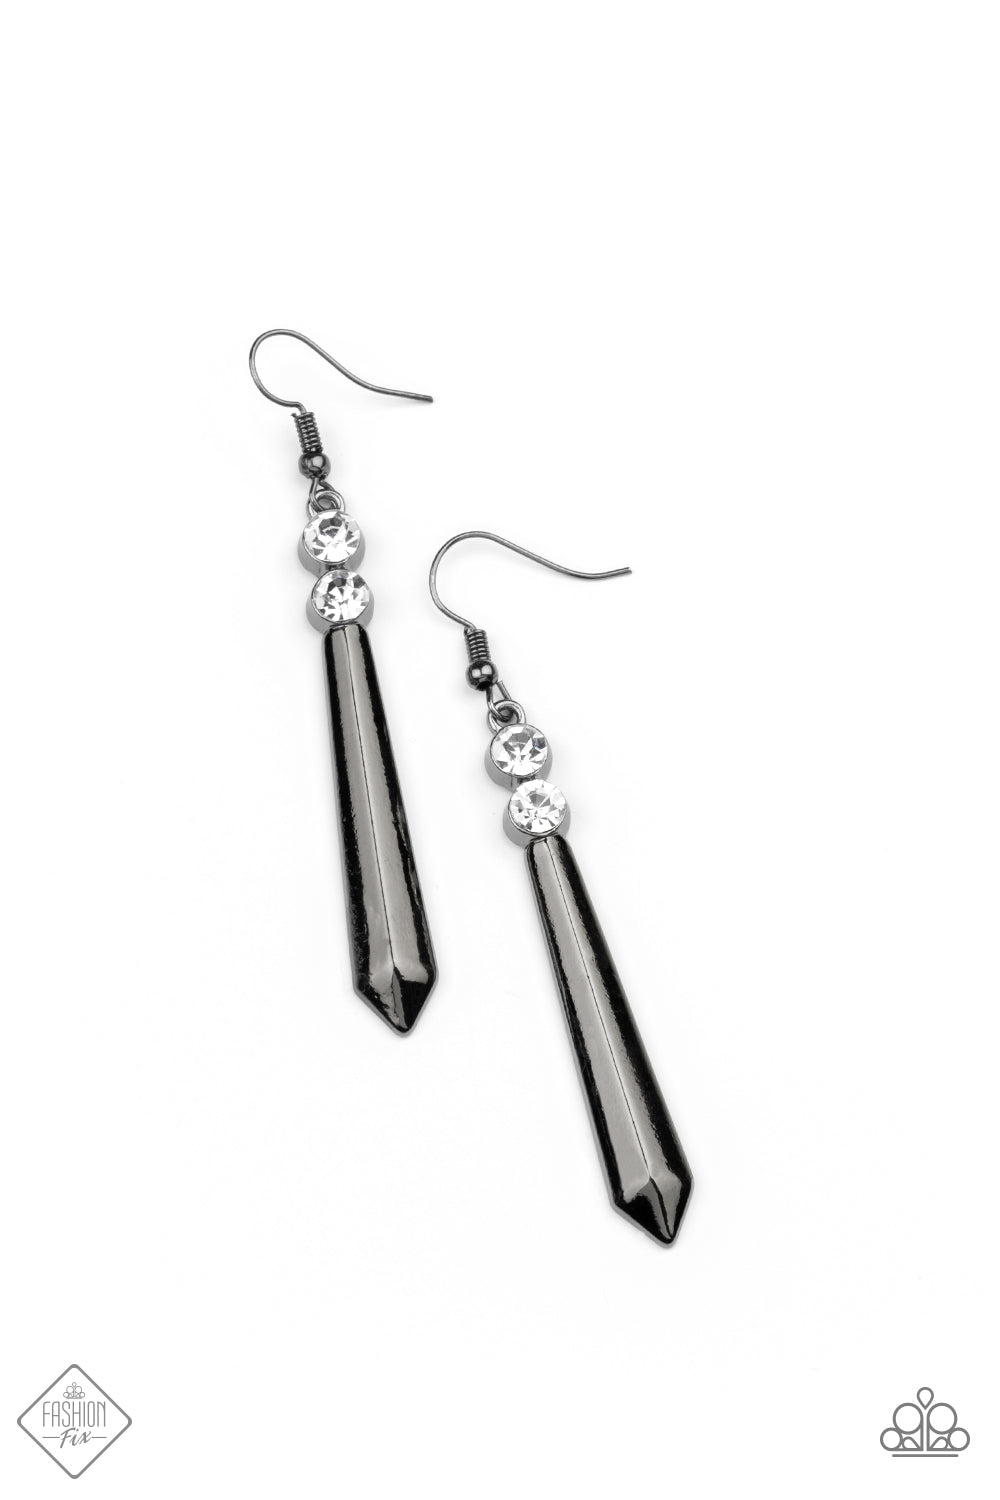 Paparazzi Accessories - ​Sparkle Stream Black Earring Fashion Fix May 2021 #MM0521